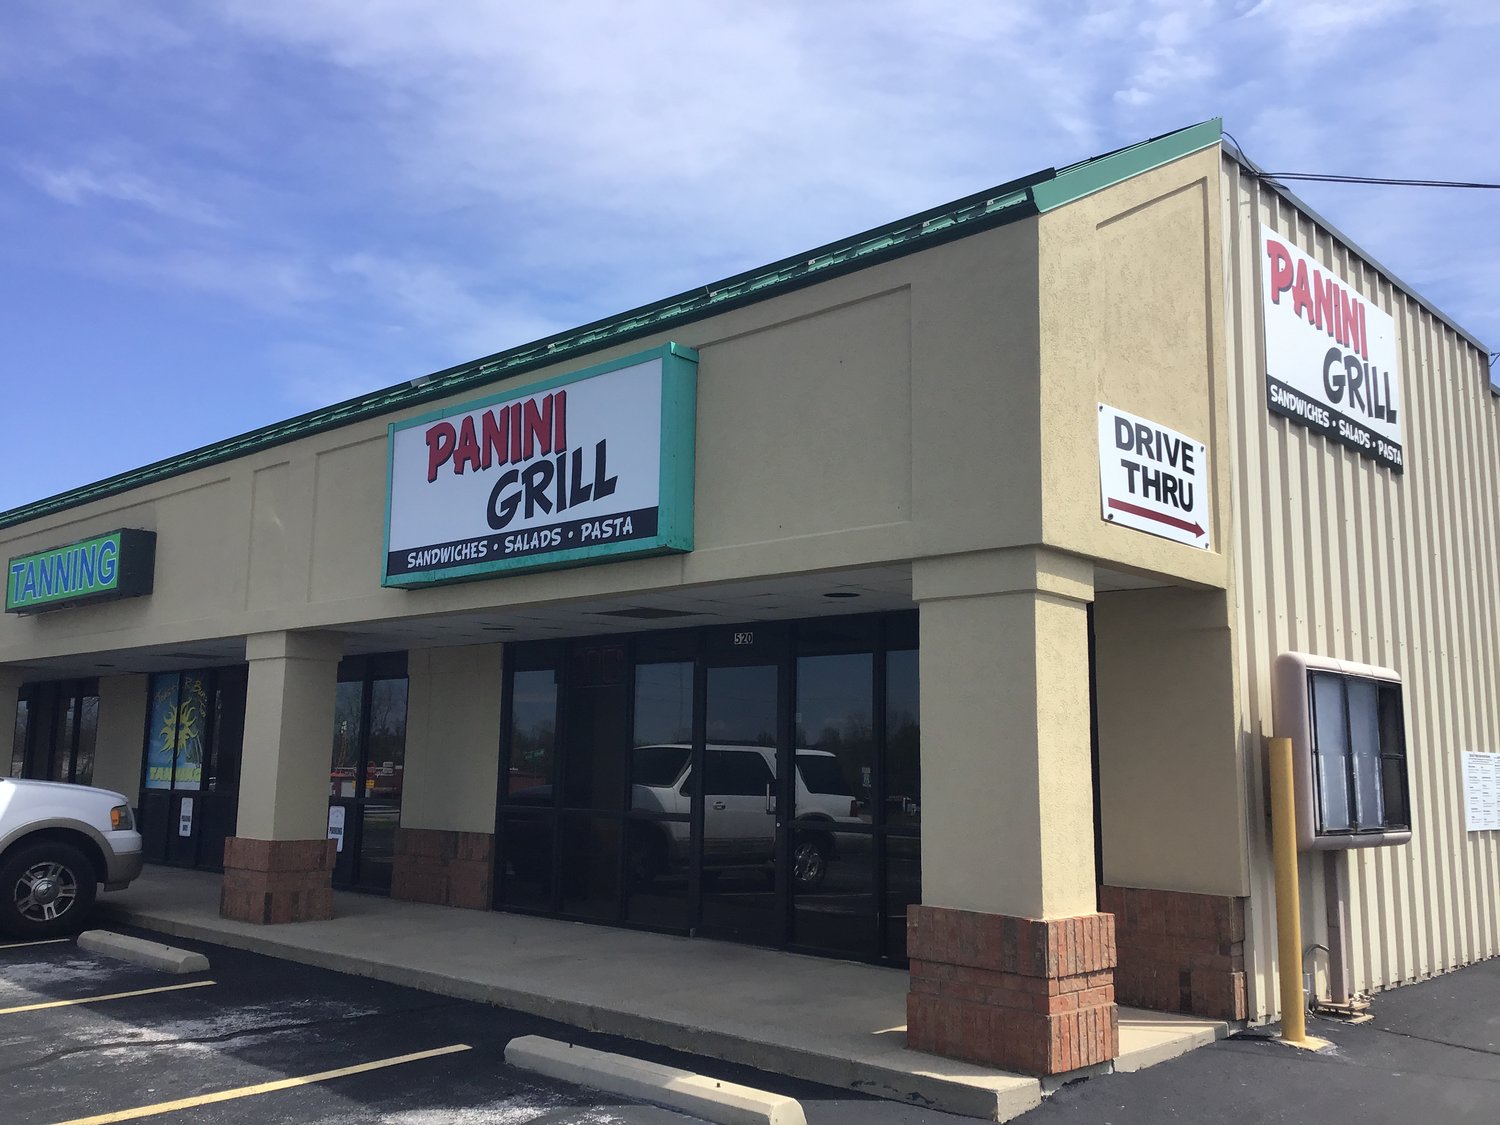 Panini Grill has started drive-thru service at 520 N. West Bypass in the Carpenter Heights center.